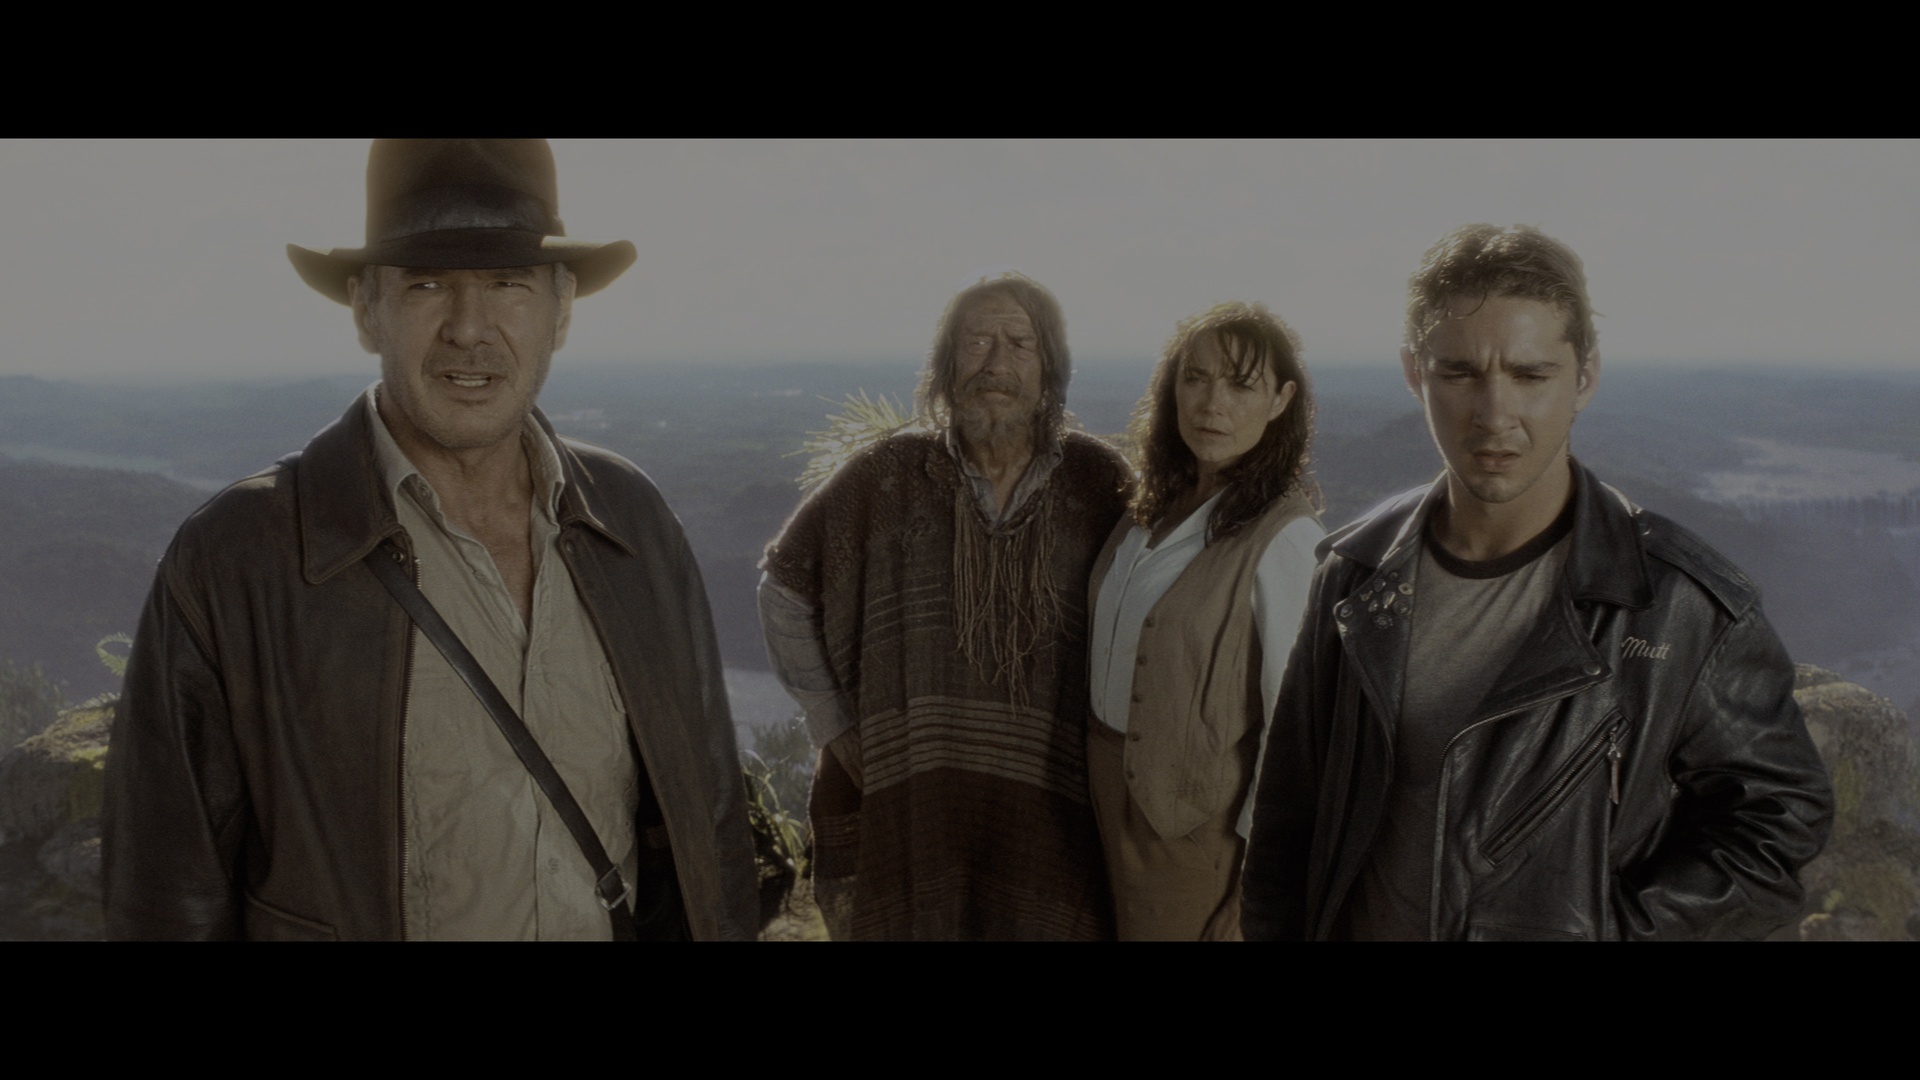 INDIANA JONES AND THE KINGDOM OF THE CRYSTAL SKULL (2008) - Costume Designer Bernie Pollack's Limite - Image 11 of 13